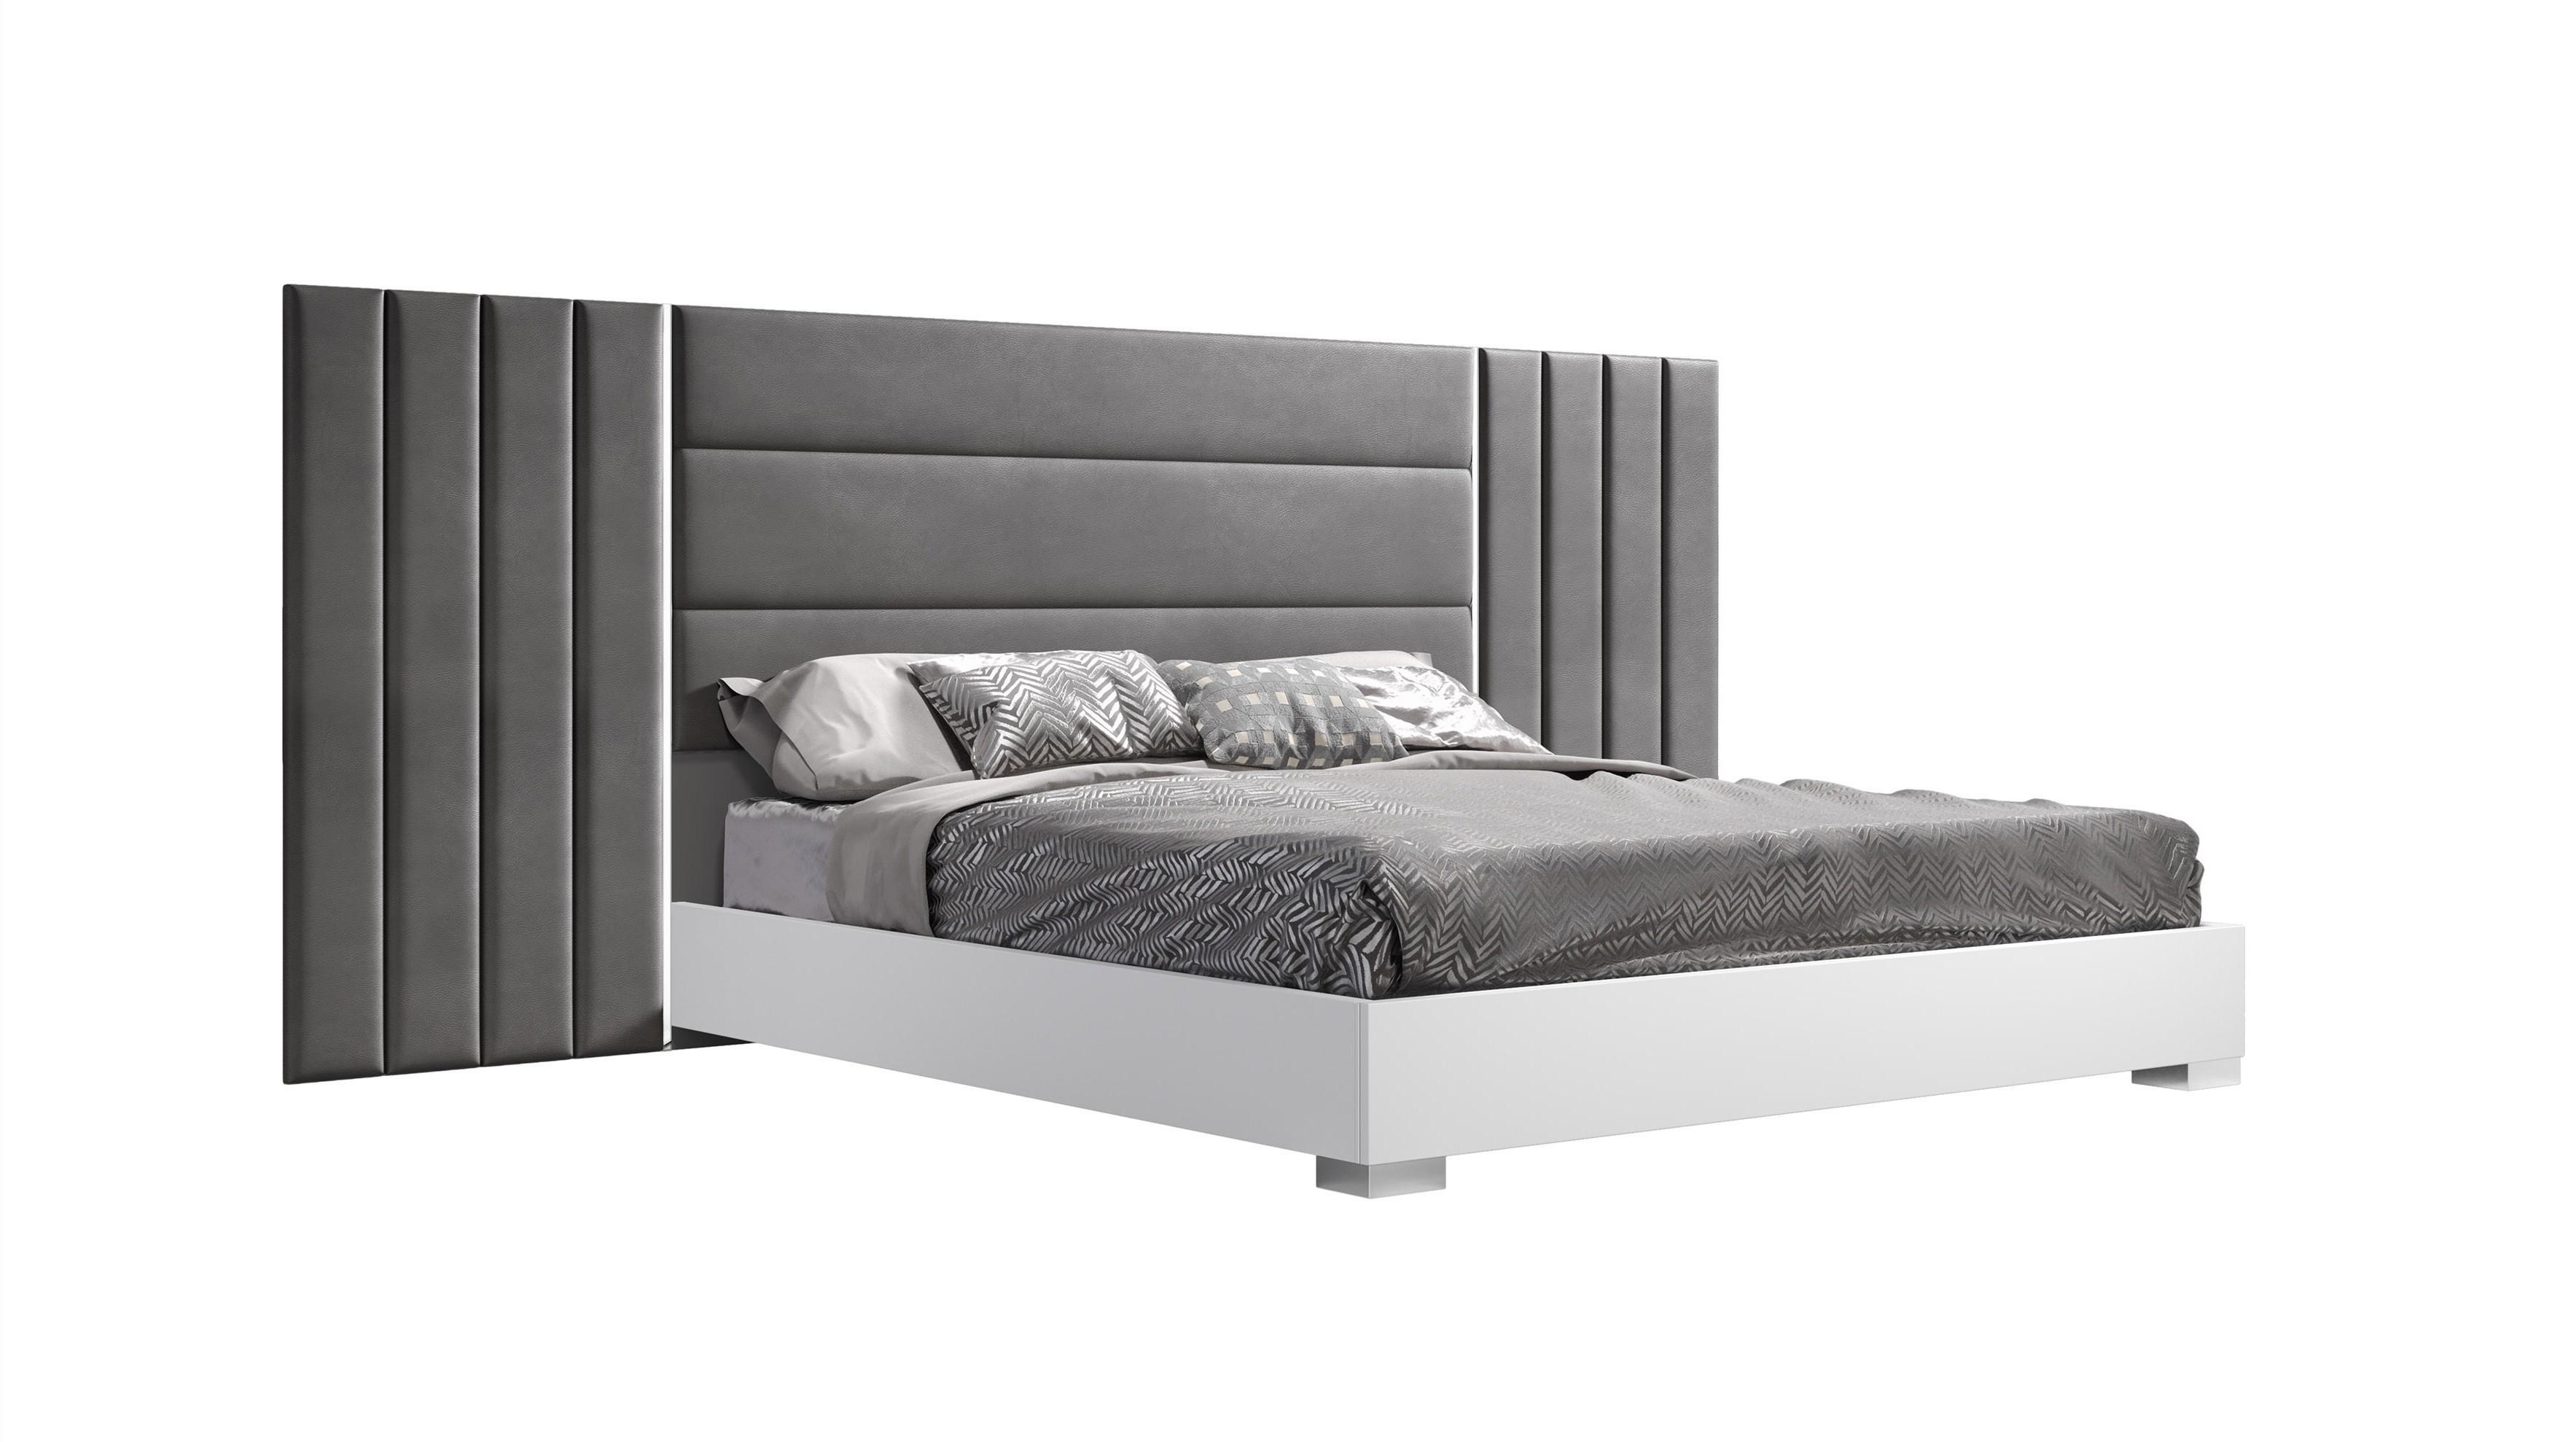 

    
Contemporary Gray and White Composite Wood Queen Bed Set 6PCS J&M Furniture Nina 18332-Q-6PCS
